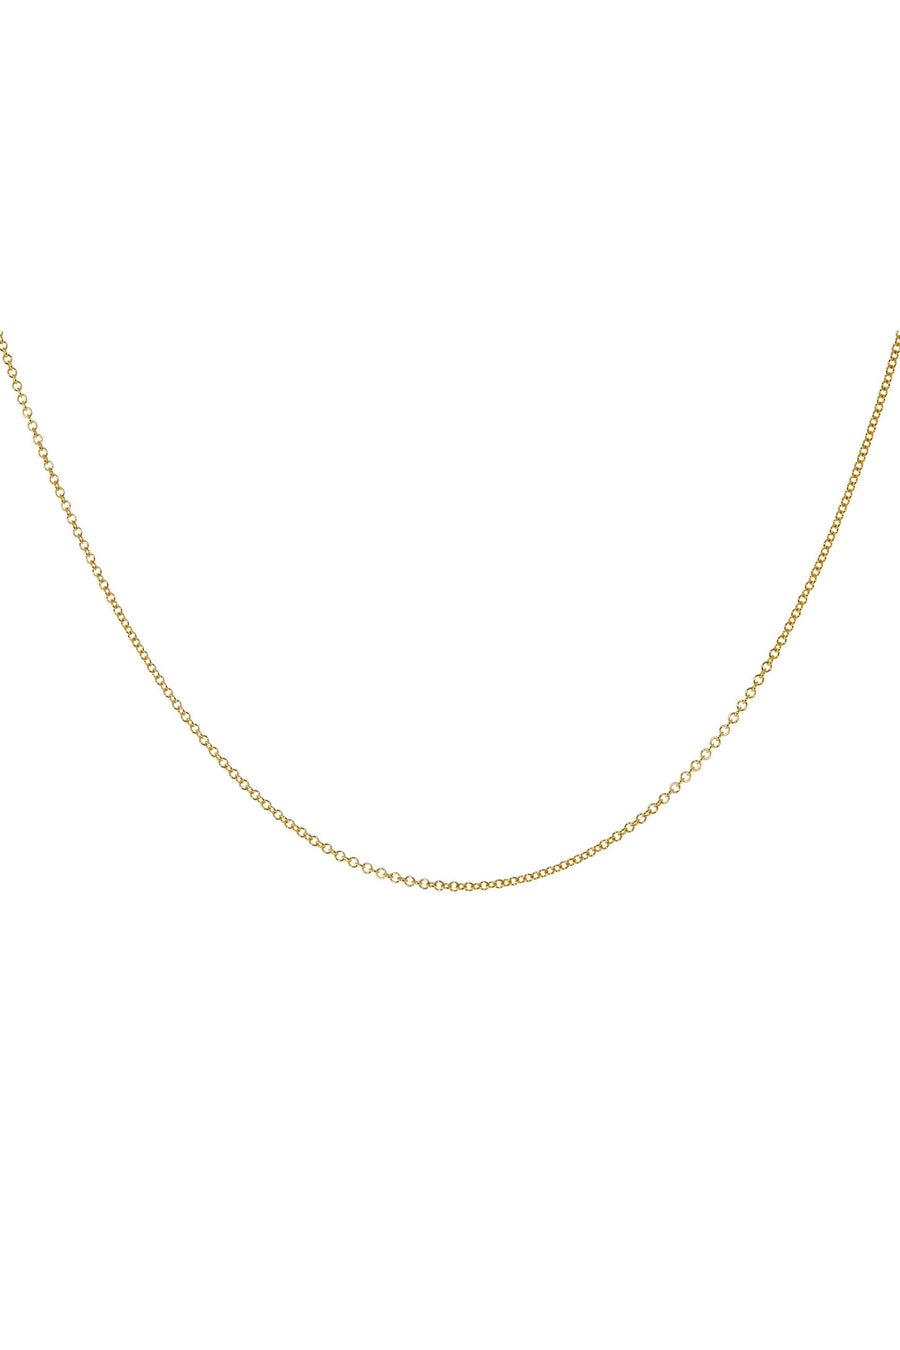 1.3mm Cable Chain in 14k Gold  | 18"